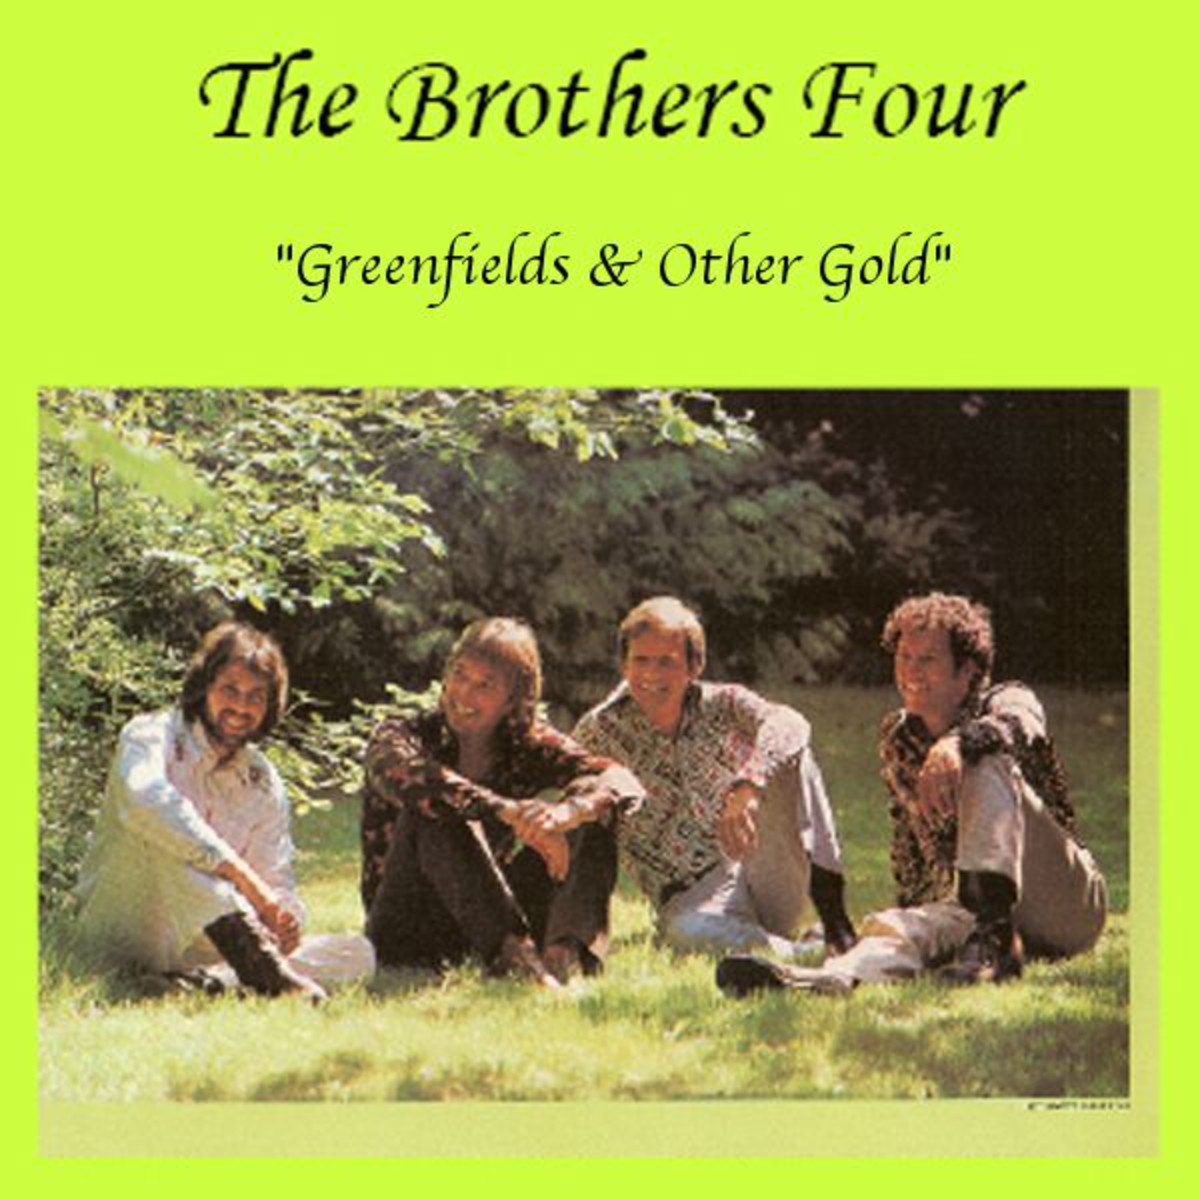 Greenfields & Other Gold